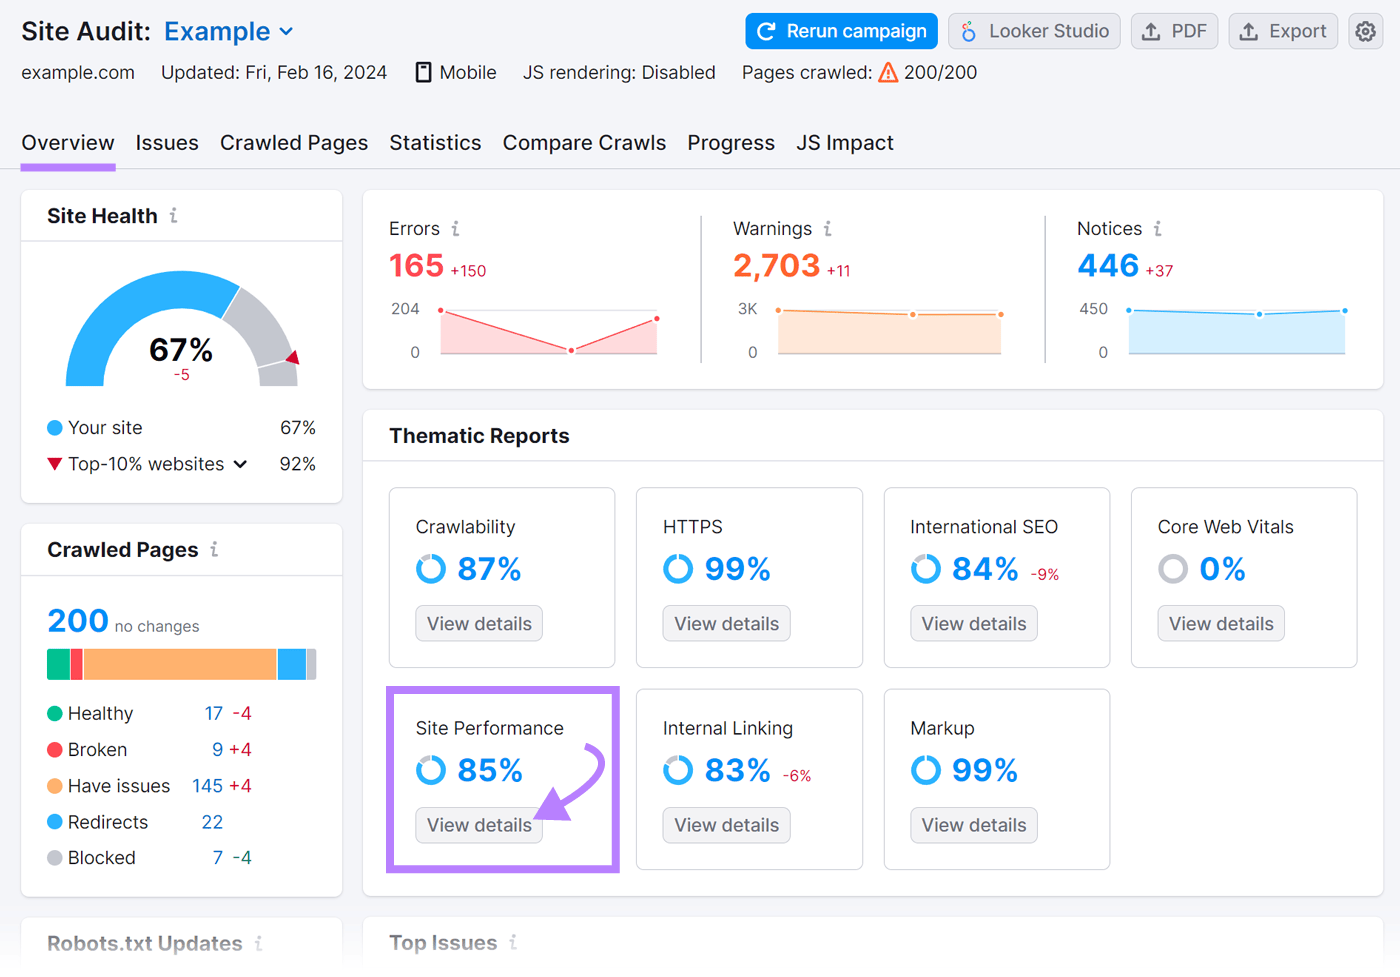 “Site Performance” widget highlighted nether  “Thematic Reports" conception  successful  Site Audit tool